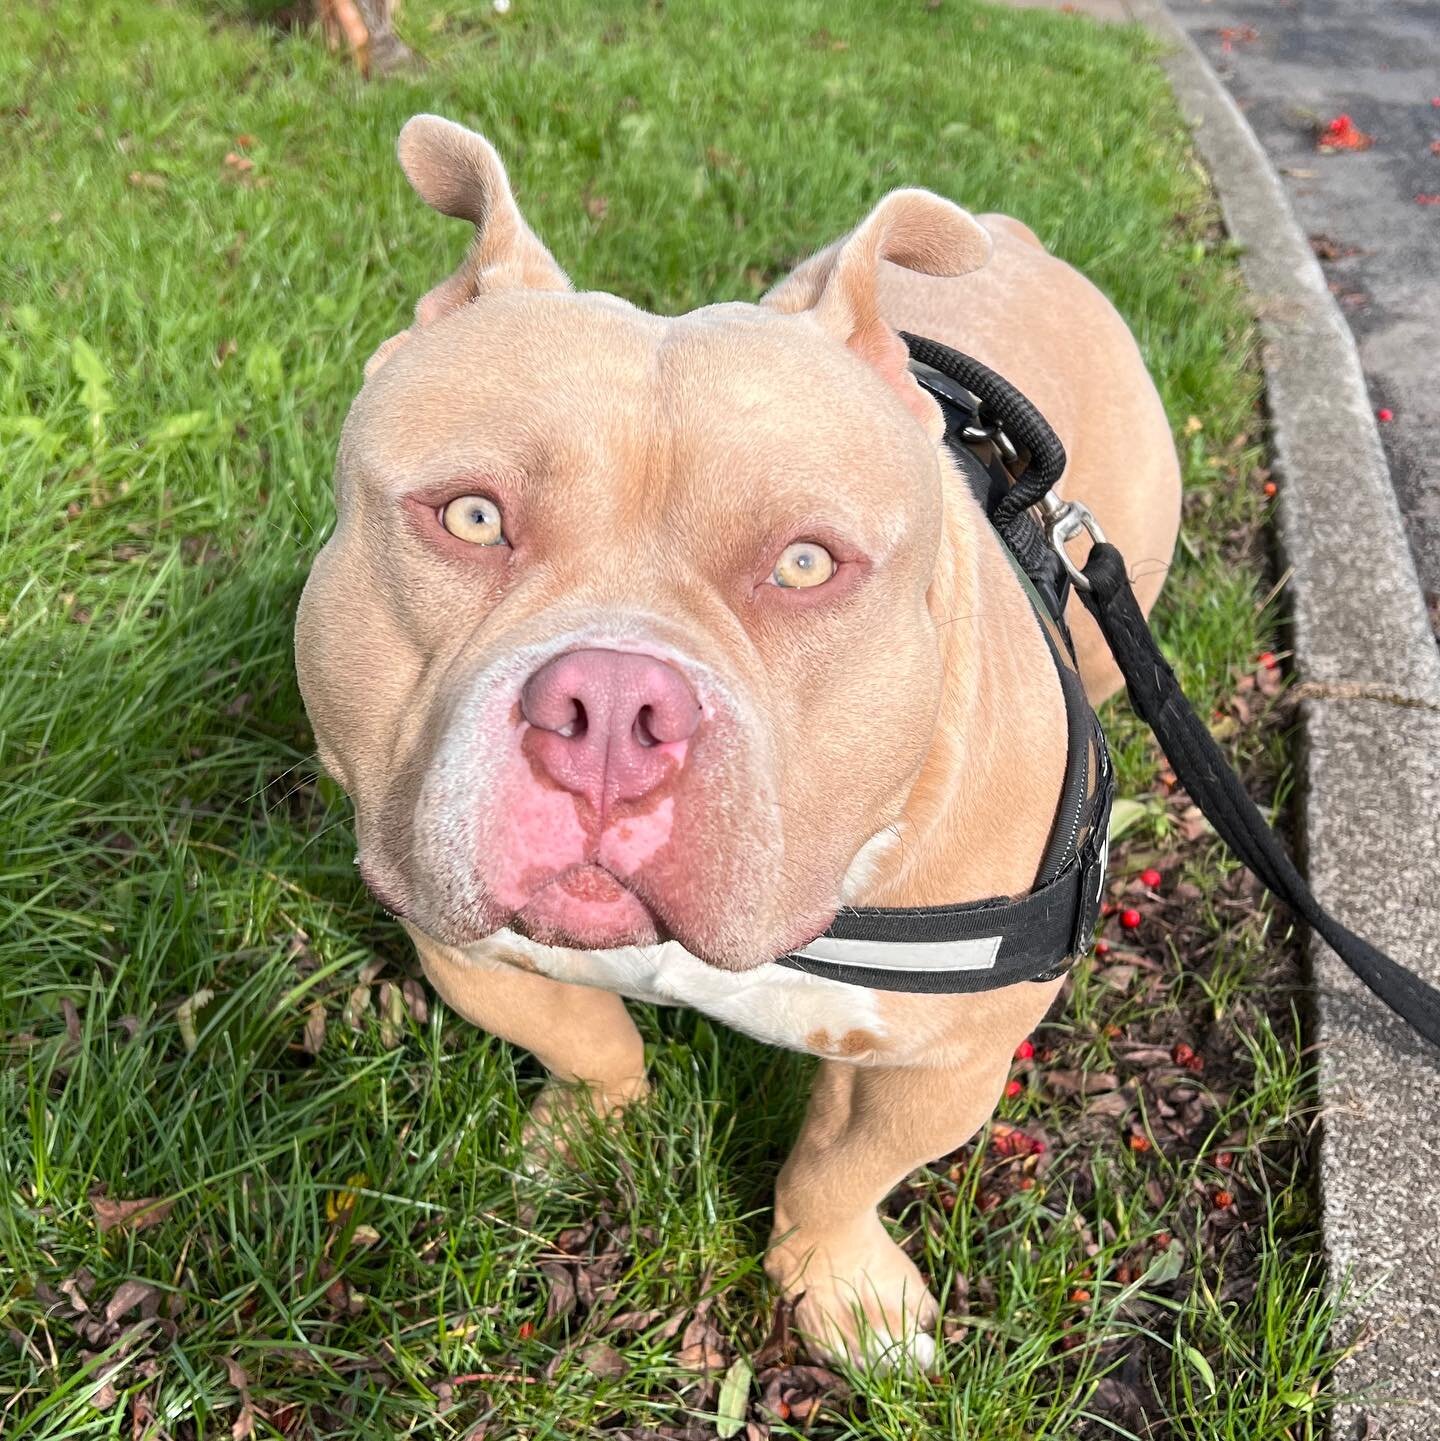 I had a recall session with Cash a 15 month old pocket Bully today. He has to be one of the most polite, friendly and gentle dogs I have ever met.
#pocketbully #pittbullmix